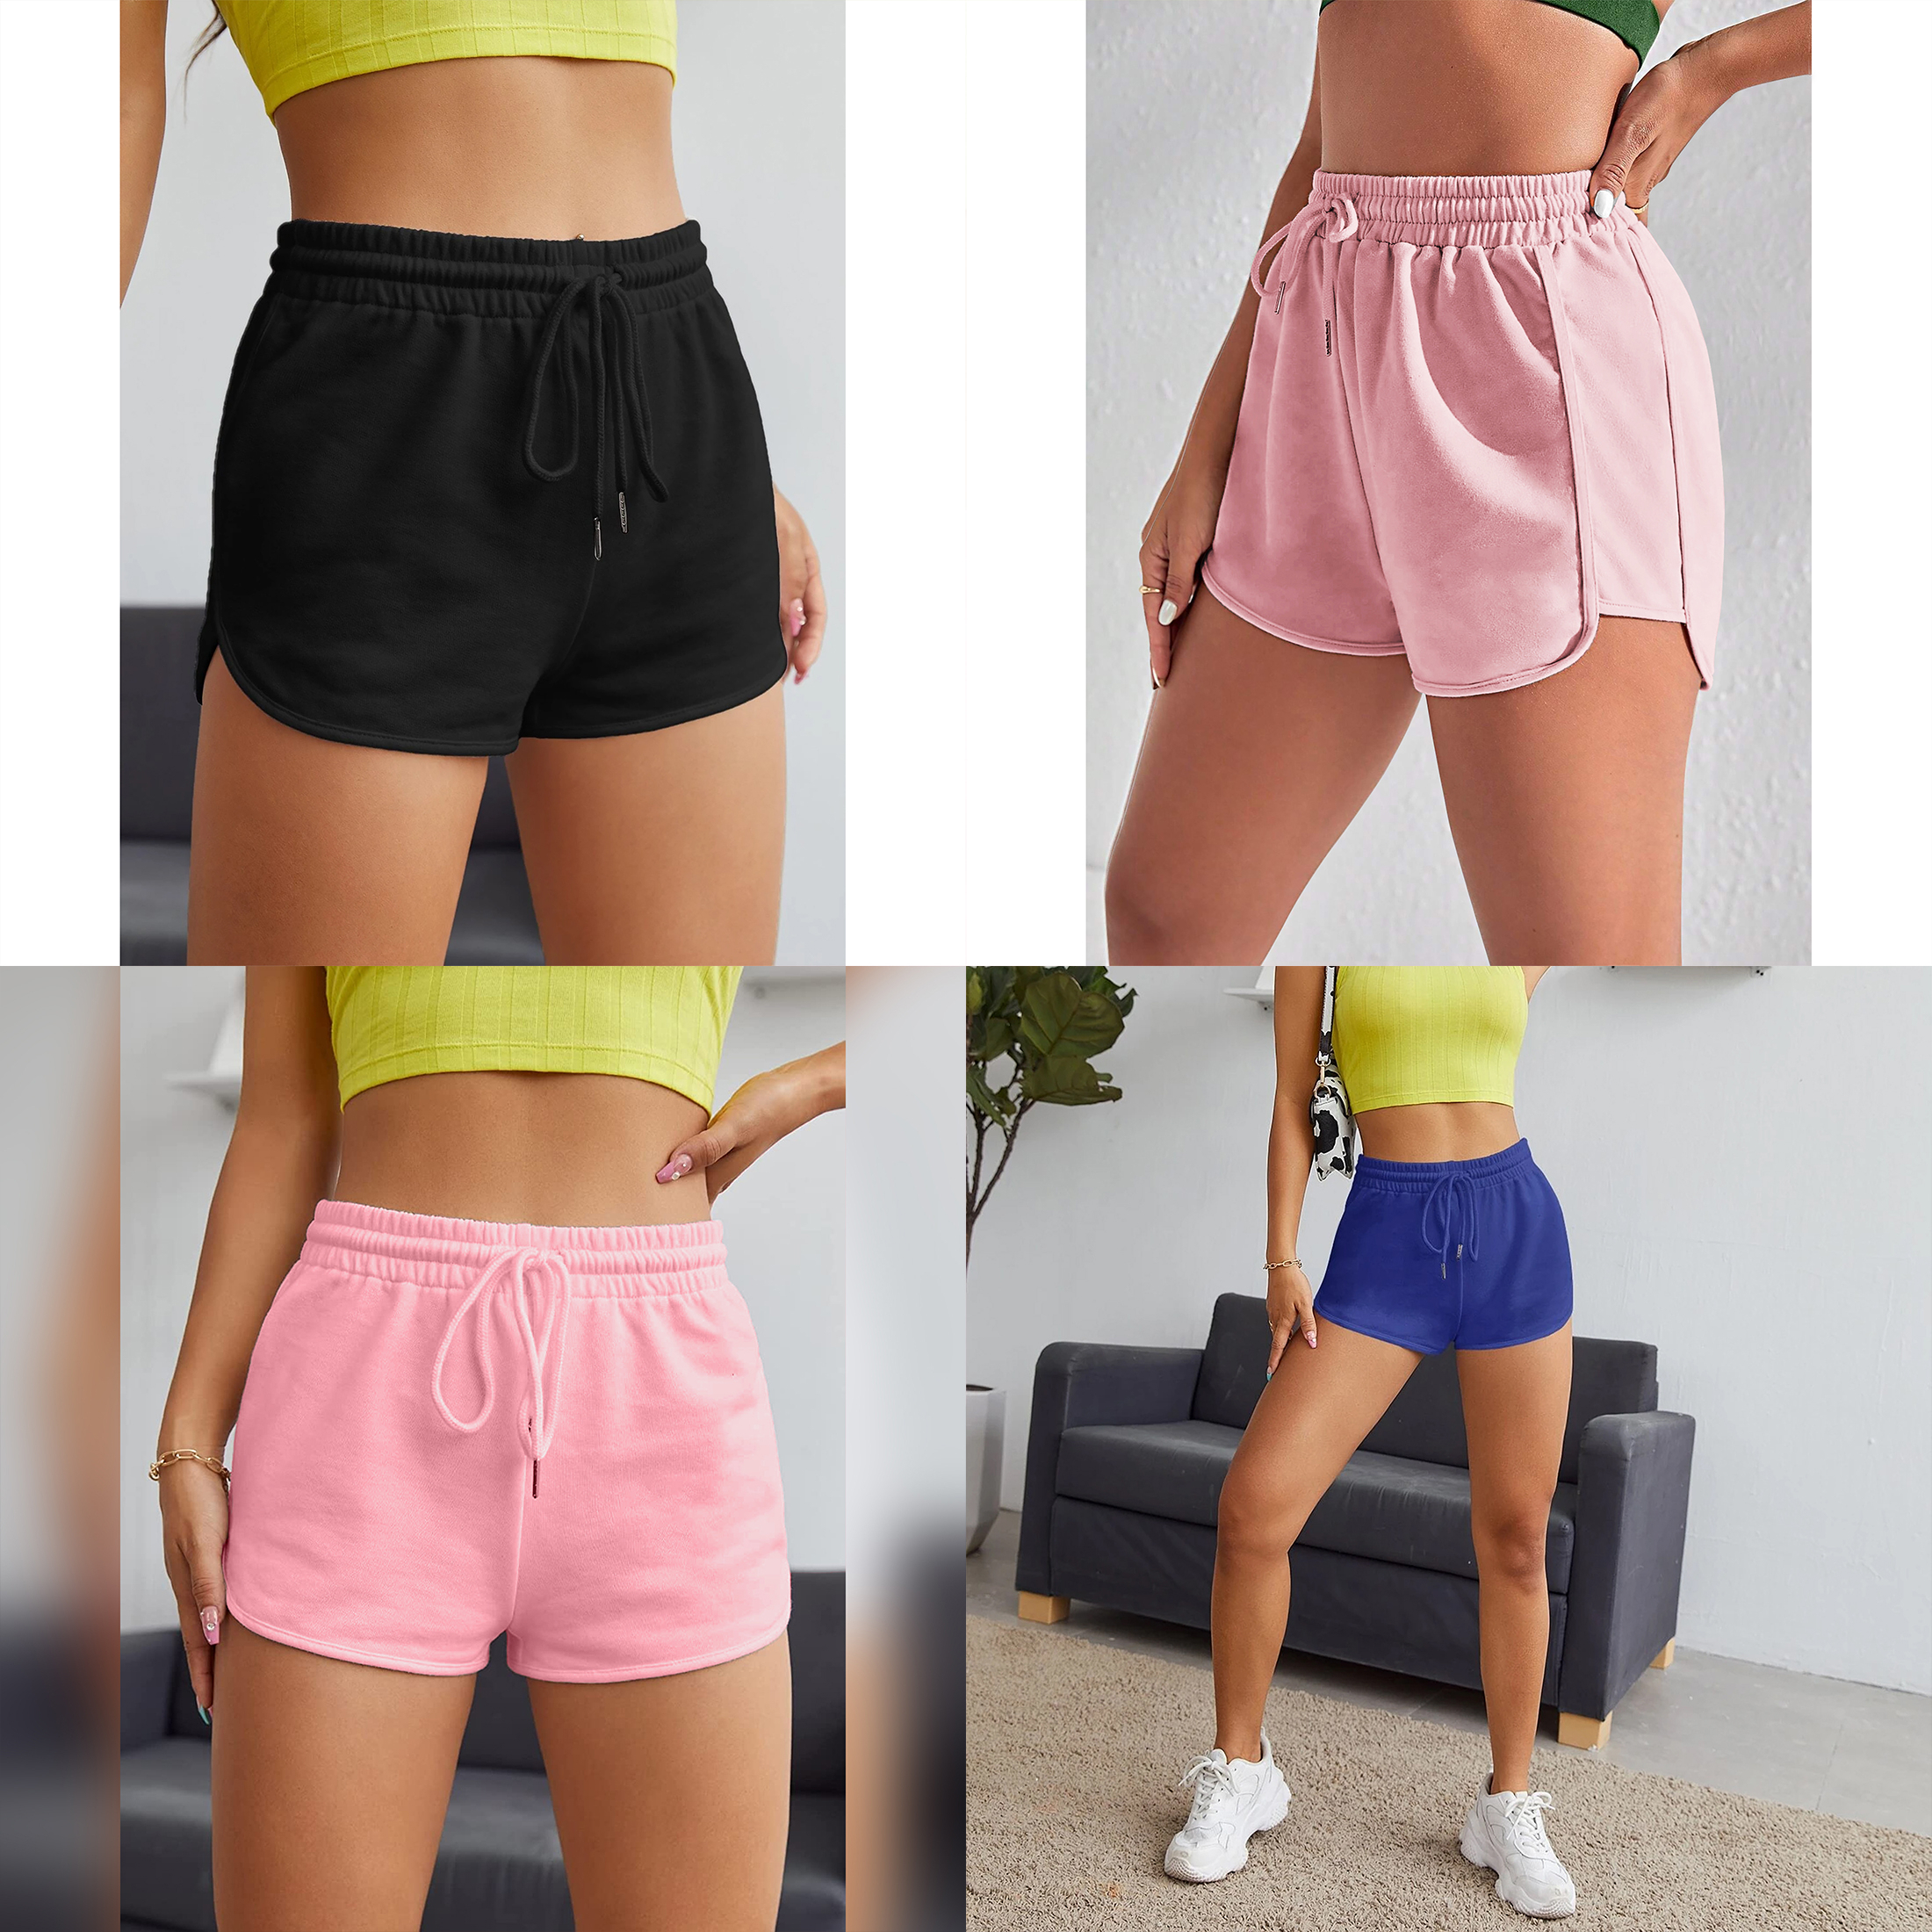 3-Pack Women's High Waist Active Running Shorts Elastic Sporty Workout Bottoms Quick Dry Athletic Performance Moisture-Wicking Gym Shorts -